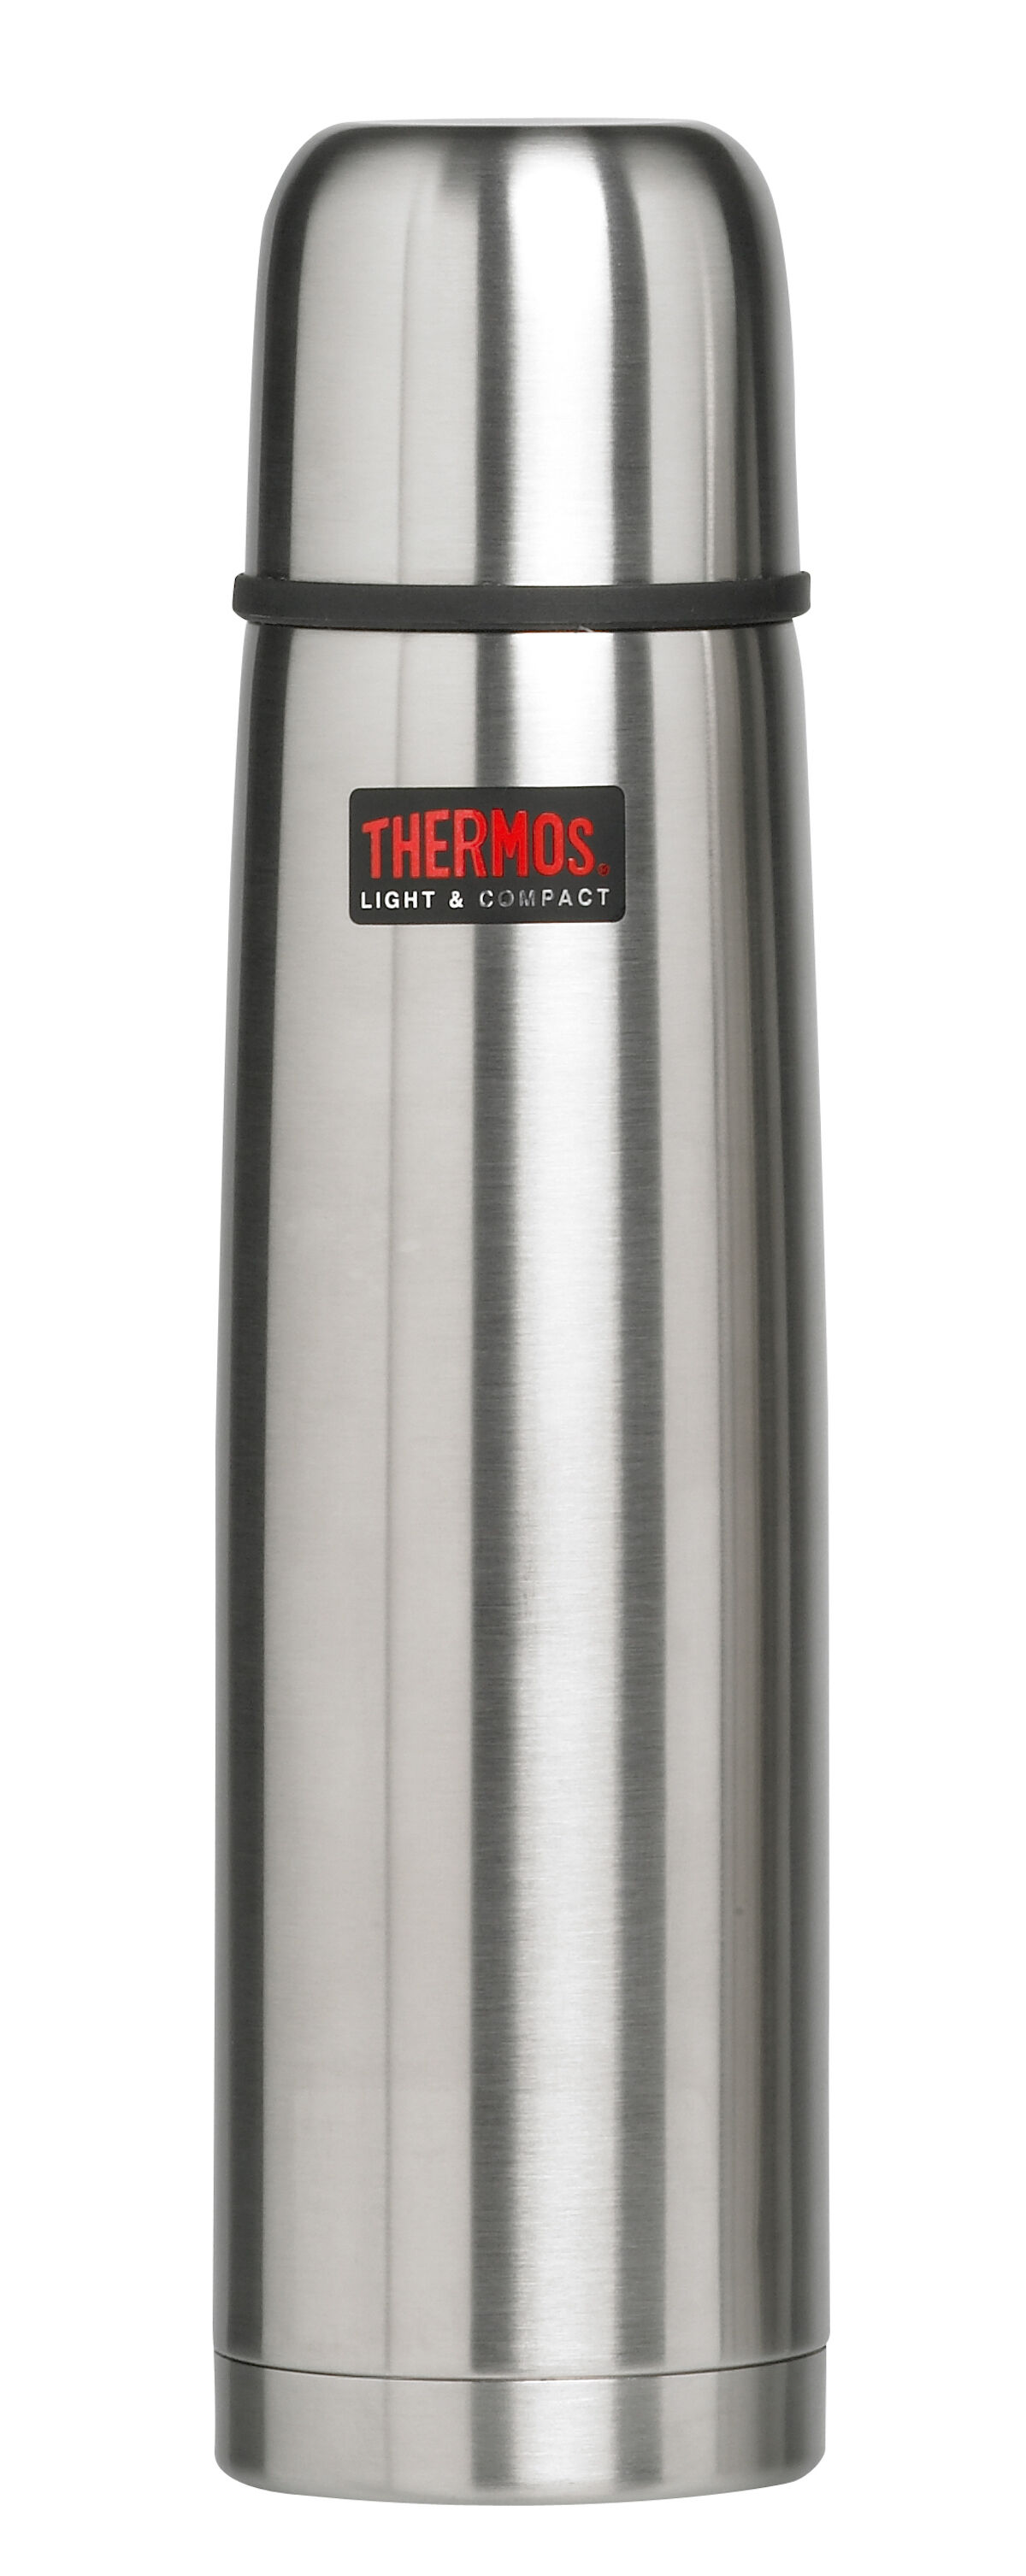 Thermos Light & Compact 1 L - Termoflaske